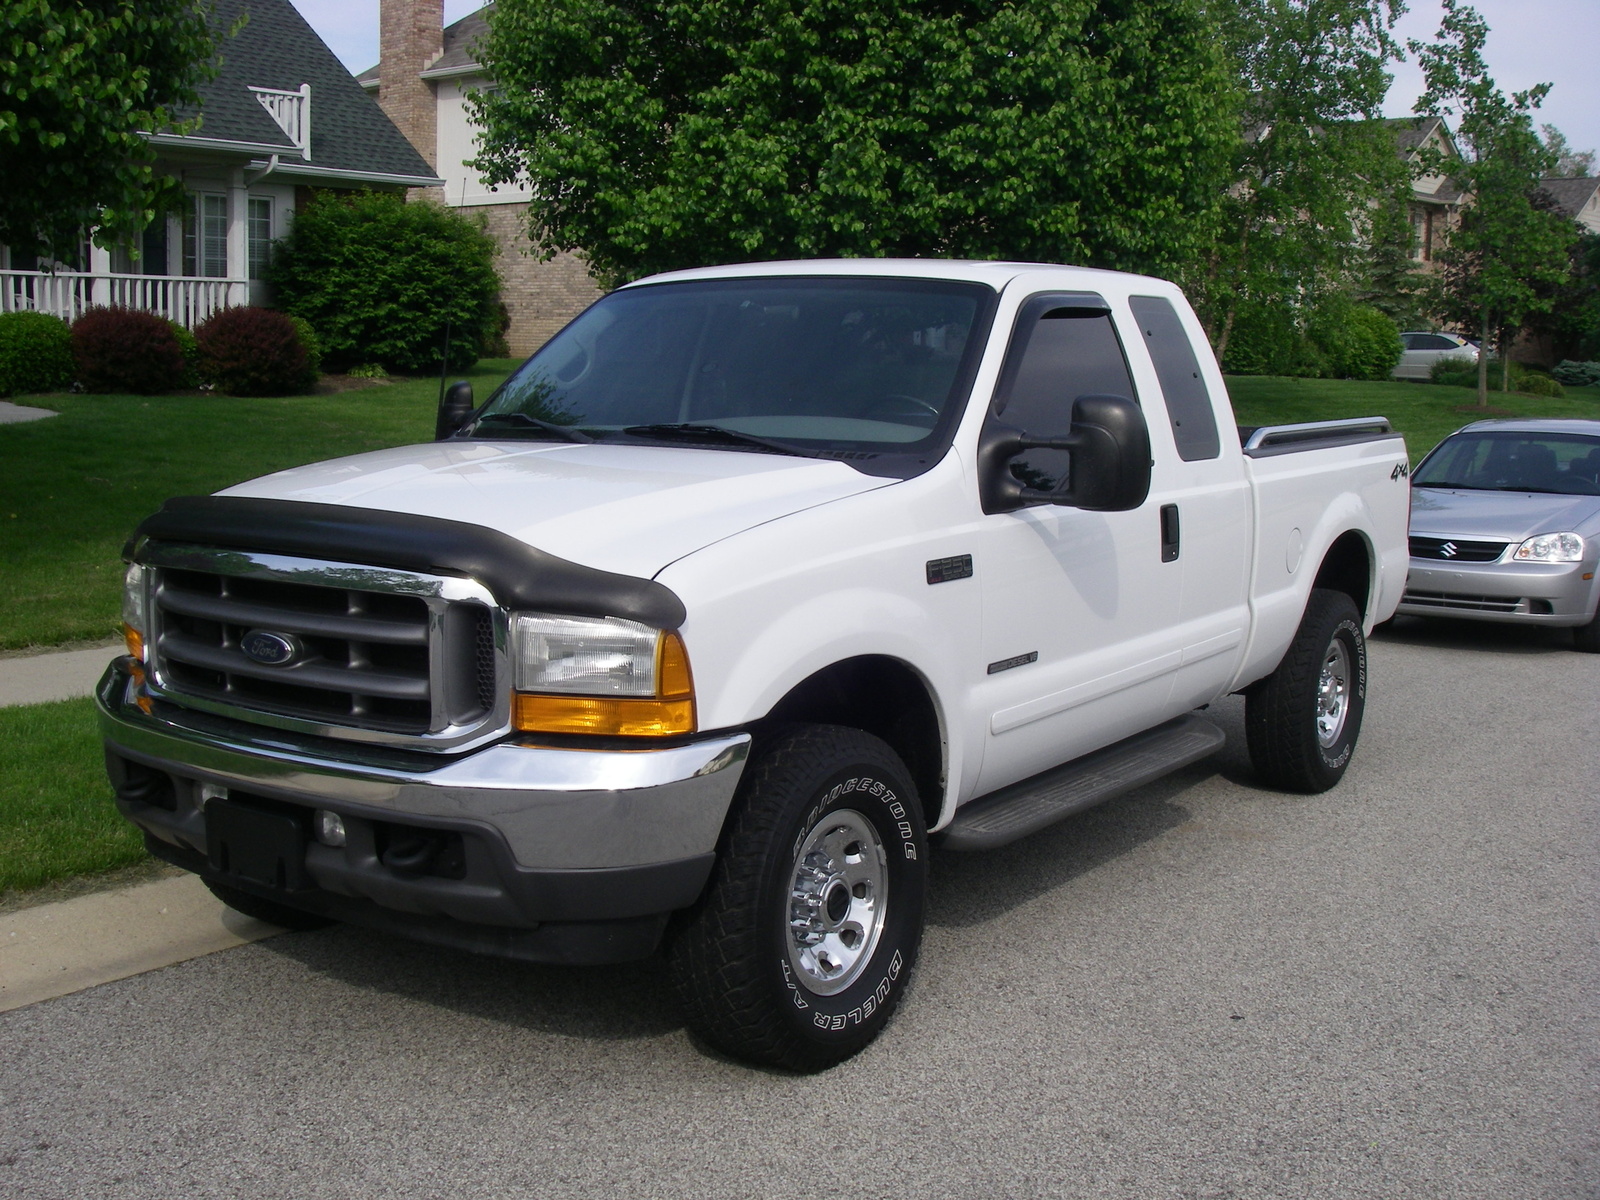 2001 Ford F250 5.4 Oil Capacity